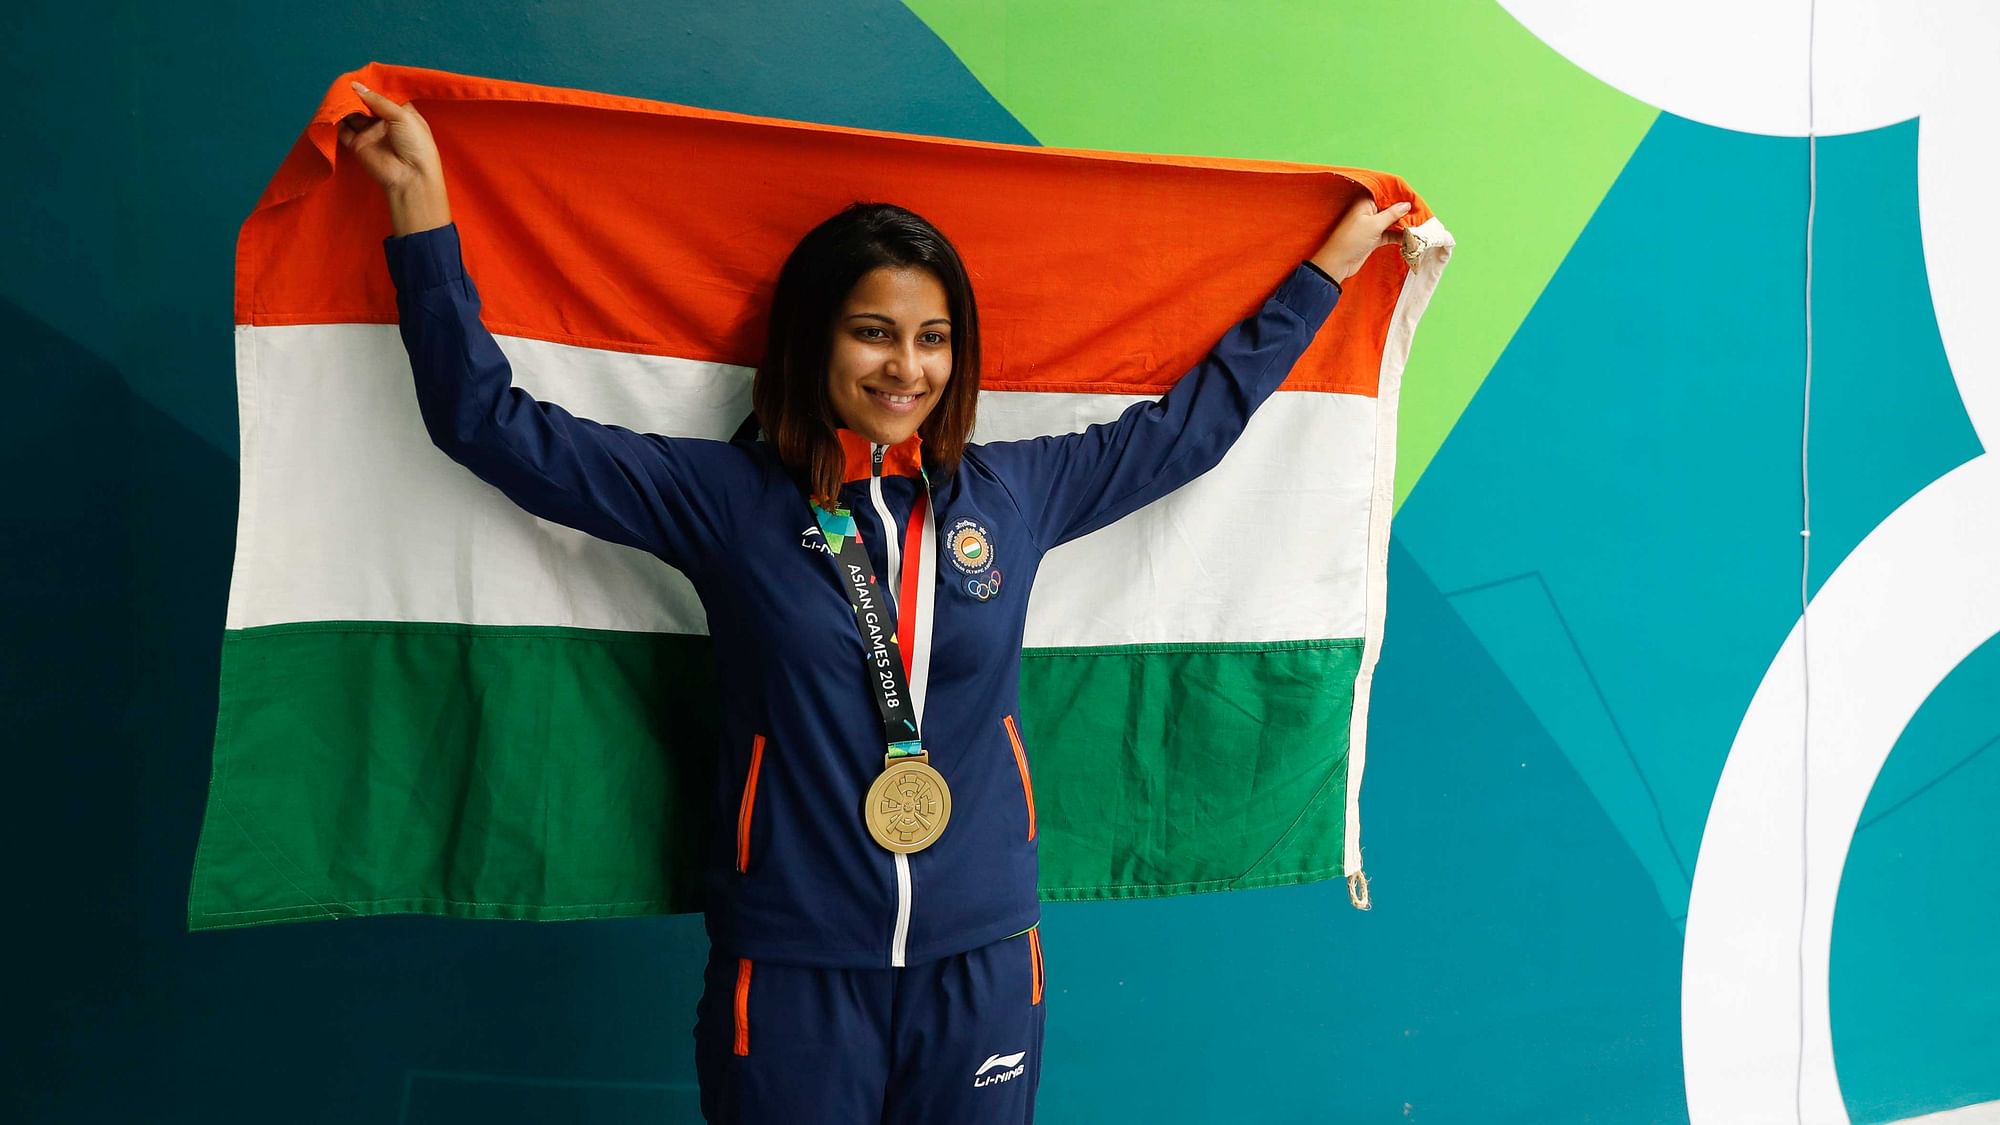 Heena Sidhu opened India’s account in shooting on Day 6 of the Asian Games, winning a bronze in the 10m Air Pistol event.